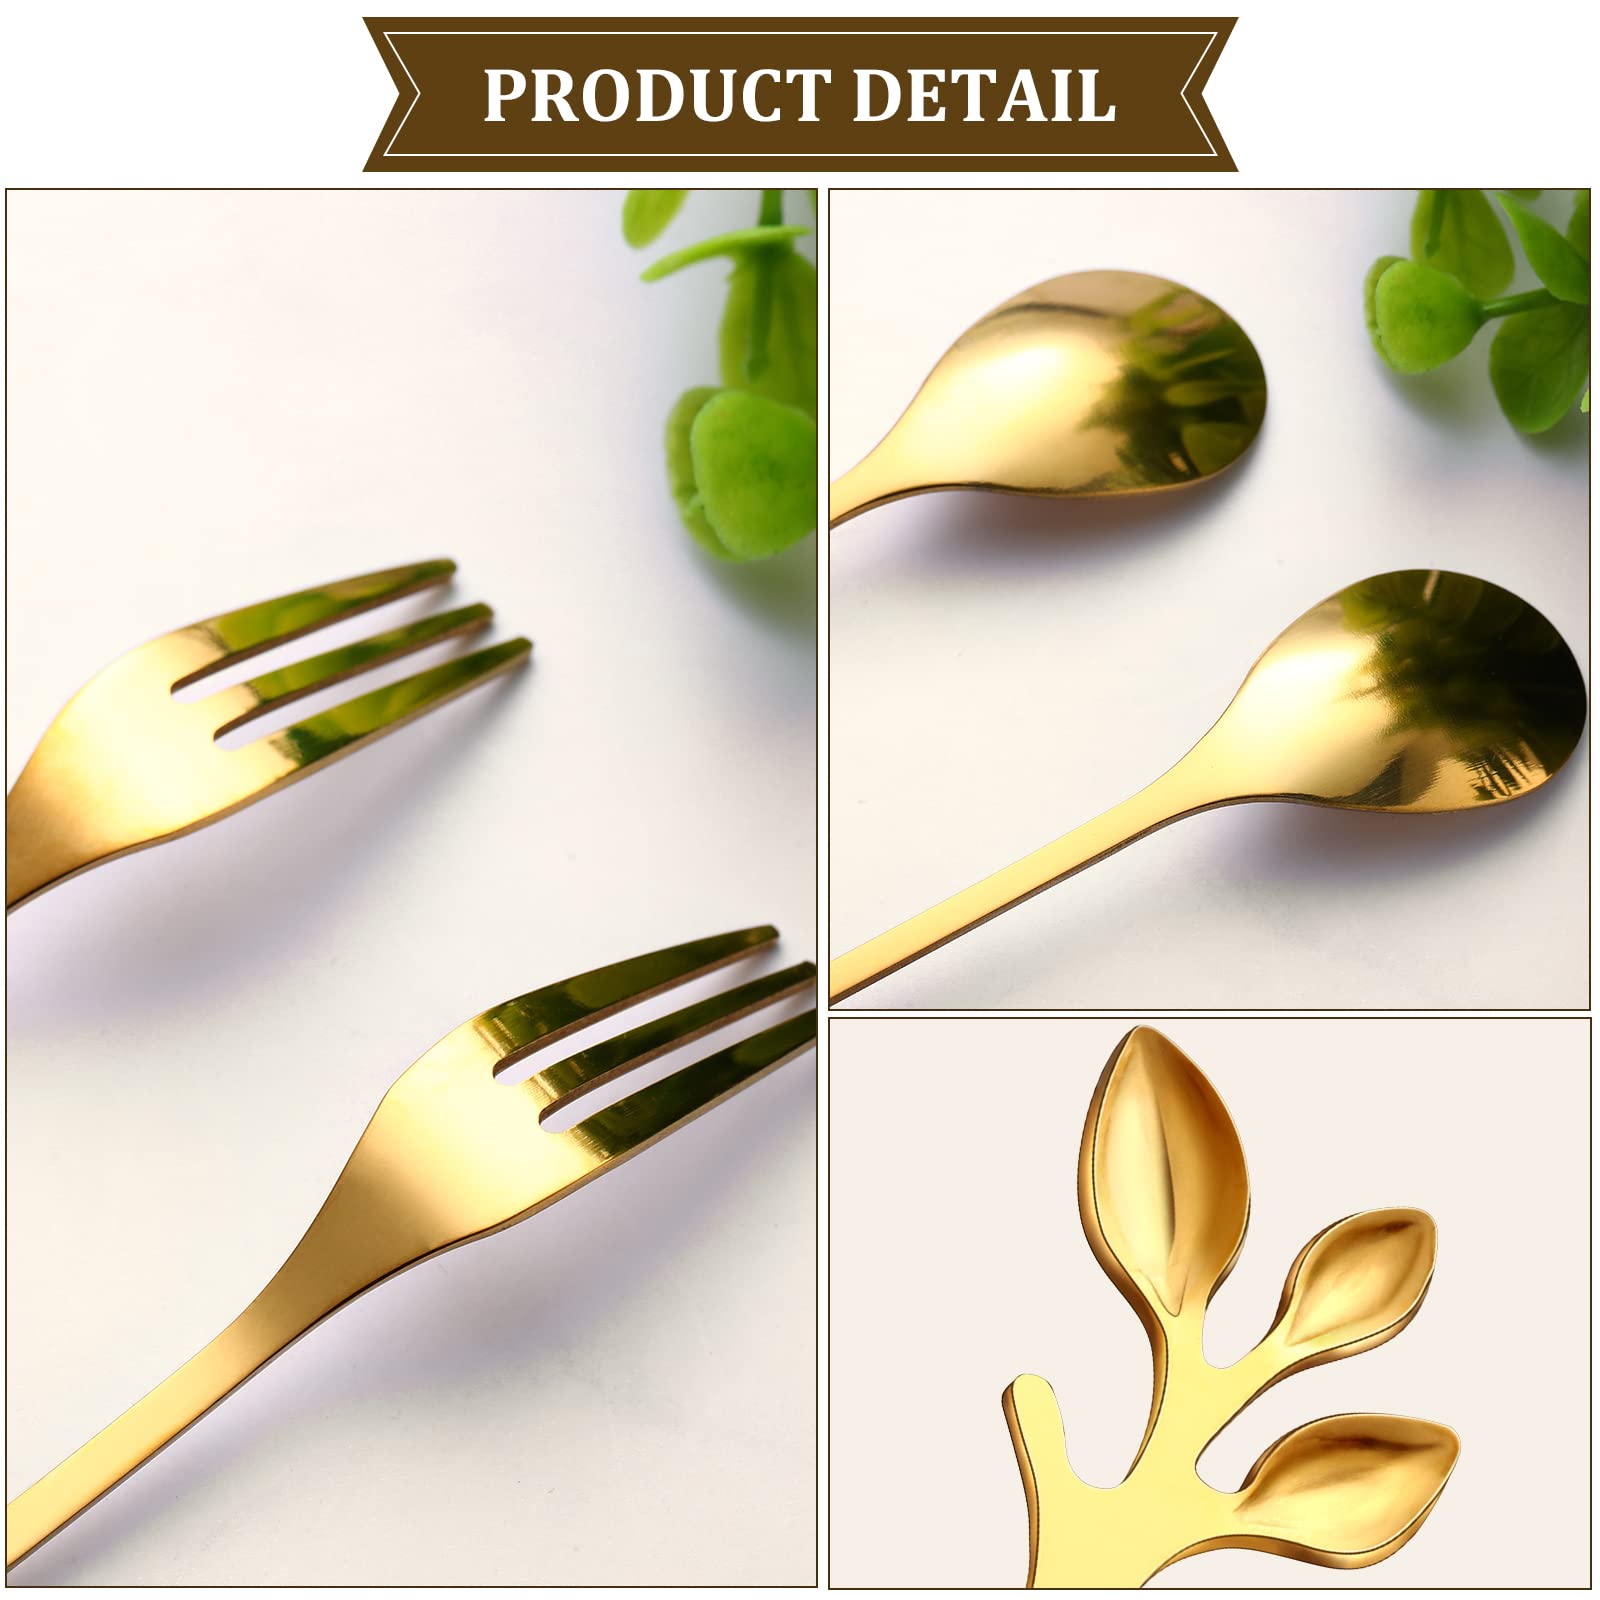 Stainless Steel Leaf Coffee Spoon and Appetizer Fork Tableware Dessert Spoon Mini Dessert Utensils Set Creative Demitasse Spoons and Forks for Stirring, Fruit, Cake, Coffee, Tea (Gold, 40 Pieces)